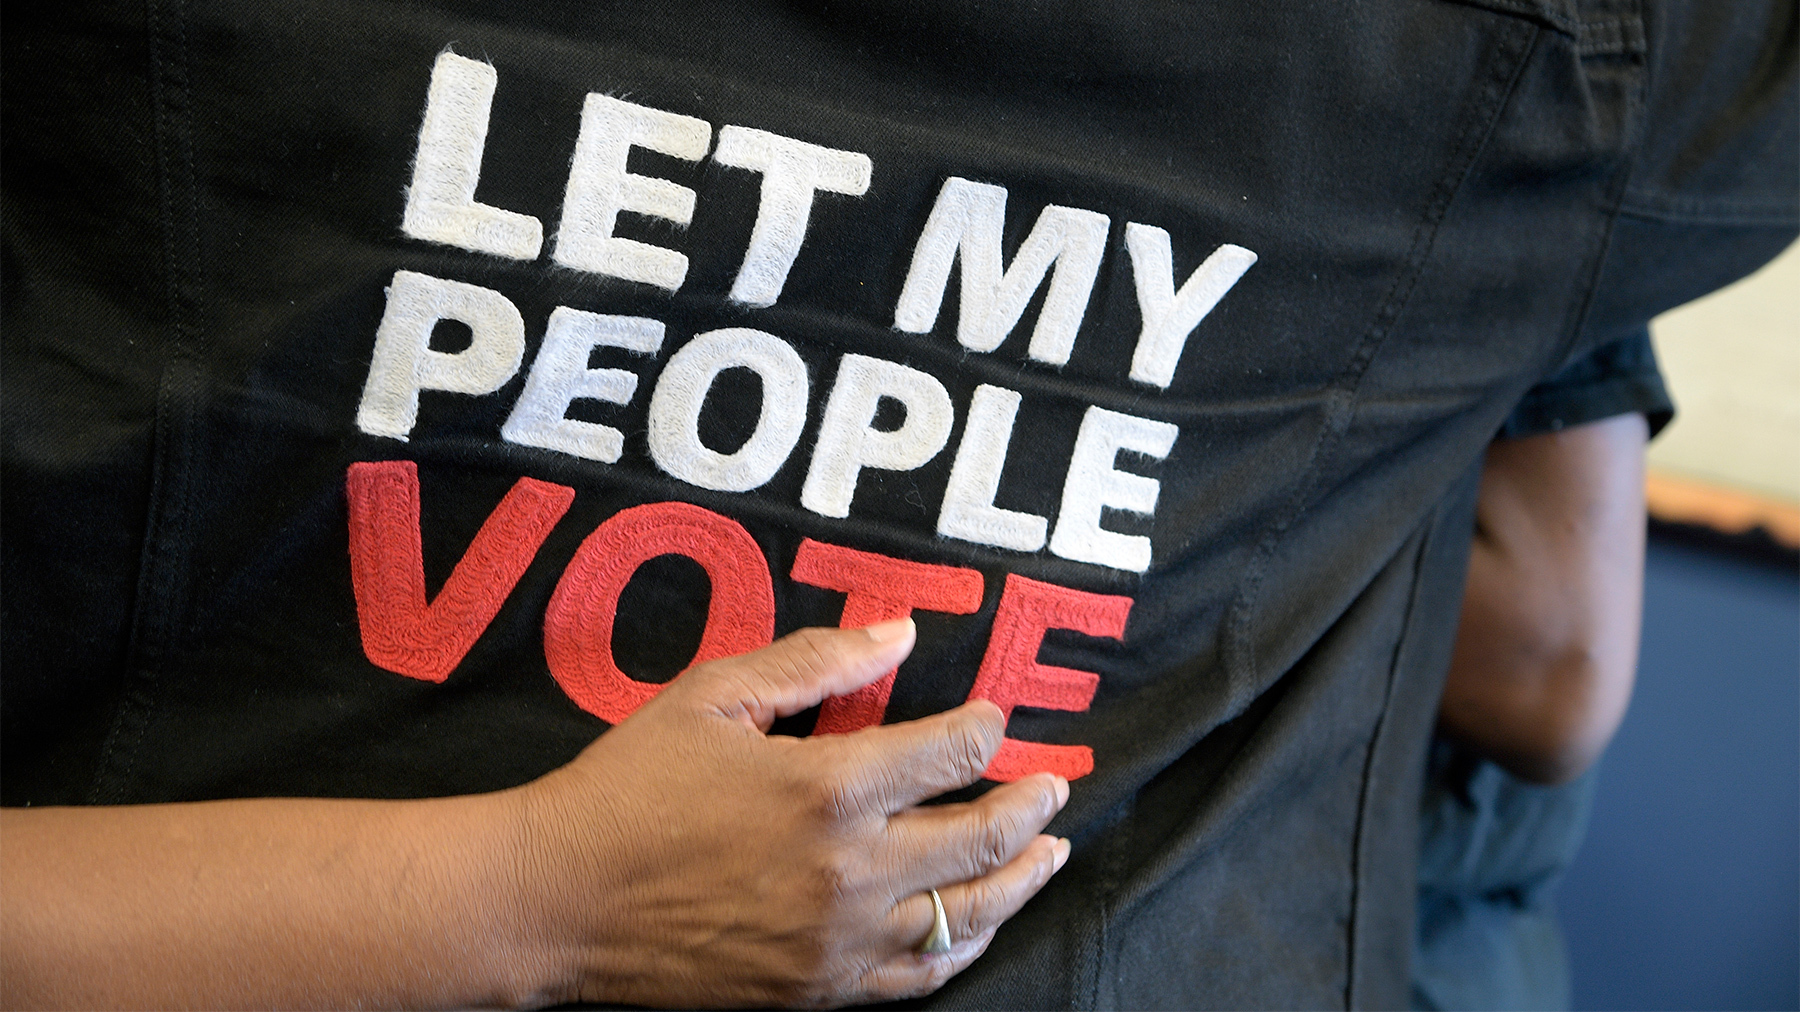 Working to restore voting rights to returning citizens ahead of the